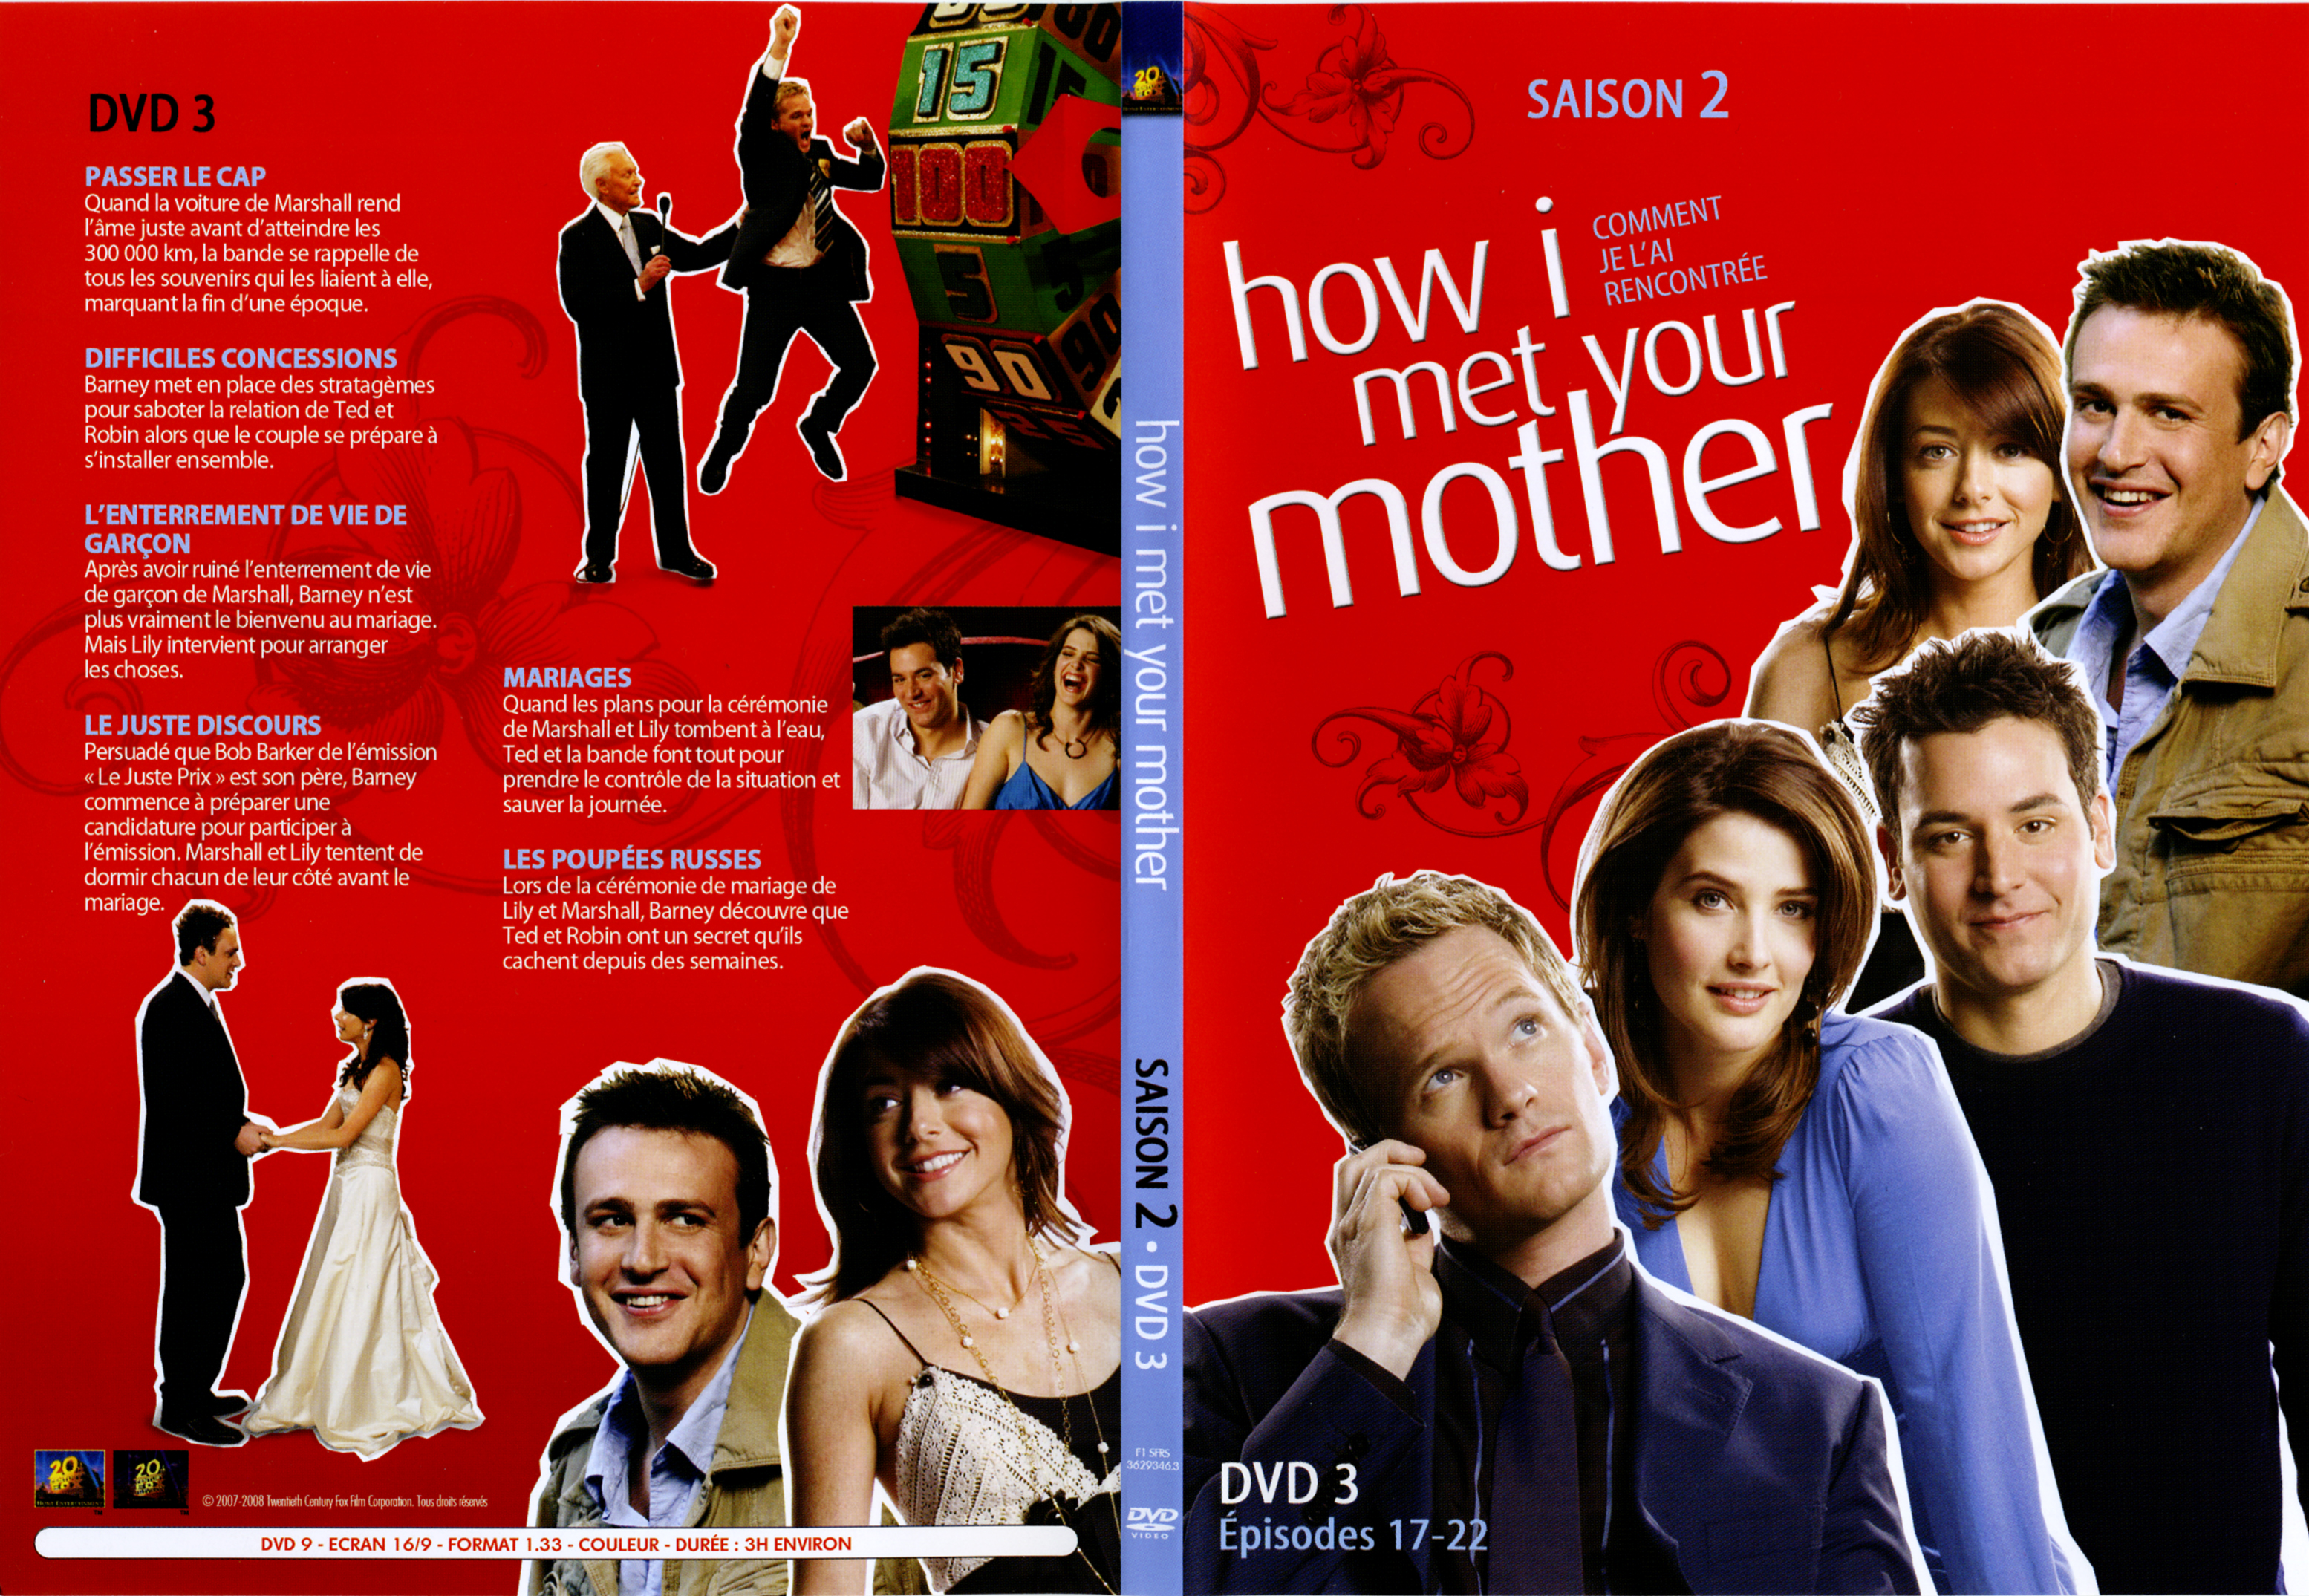 Jaquette DVD How i met your mother Saison 2 DVD 3